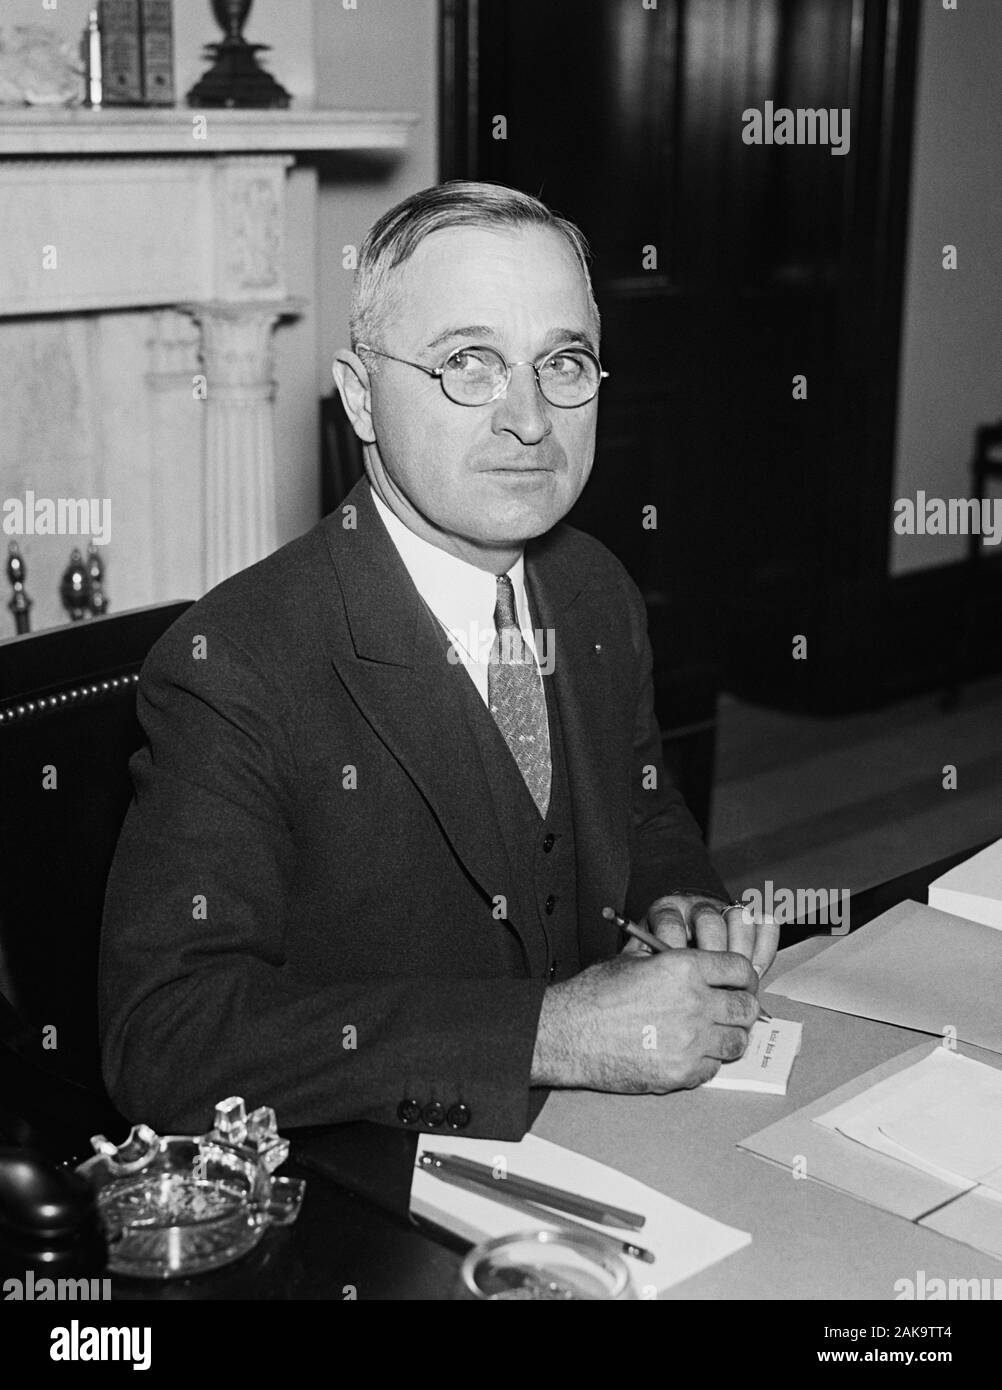 Vintage portrait photo of Missouri Senator - and future President - Harry S Truman. Photo circa 1935 by Harris & Ewing. Truman (1884 – 1972) would later become the 33rd US President (1945 – 1953). Stock Photo